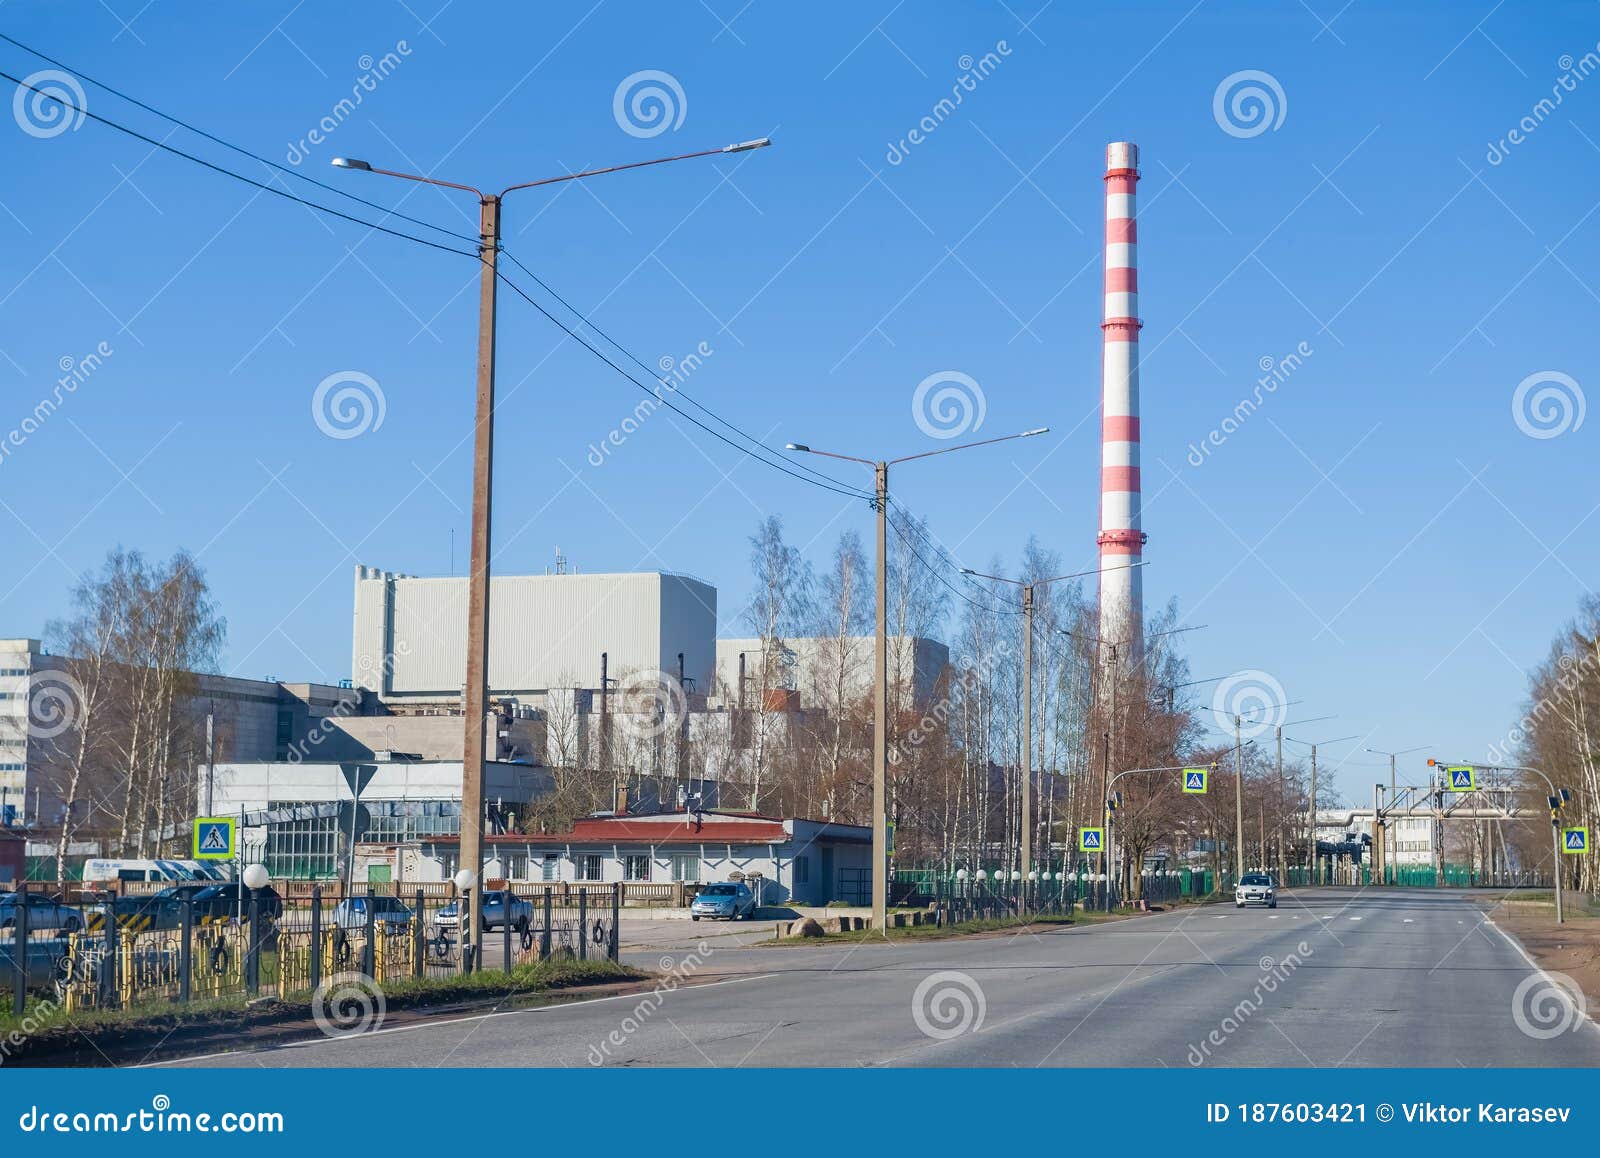 View of the of the Leningrad Nuclear Power Plant Editorial Photo - Image of leningrad: 187603421